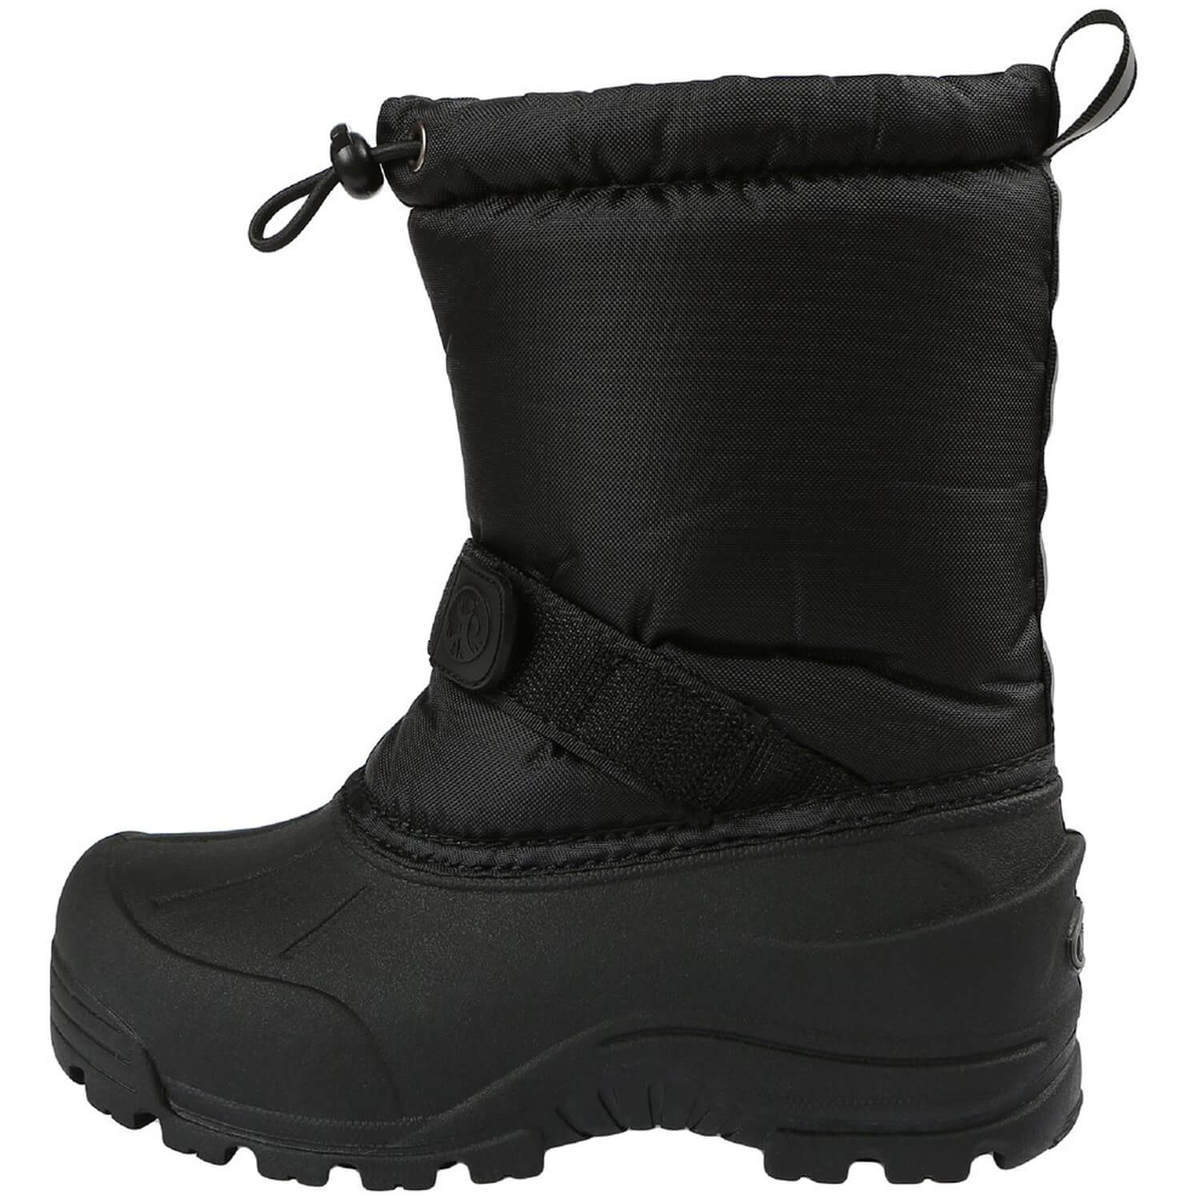 Northside Youth Frosty Insulated Winter Boots - Black - Size 6Y - Black ...